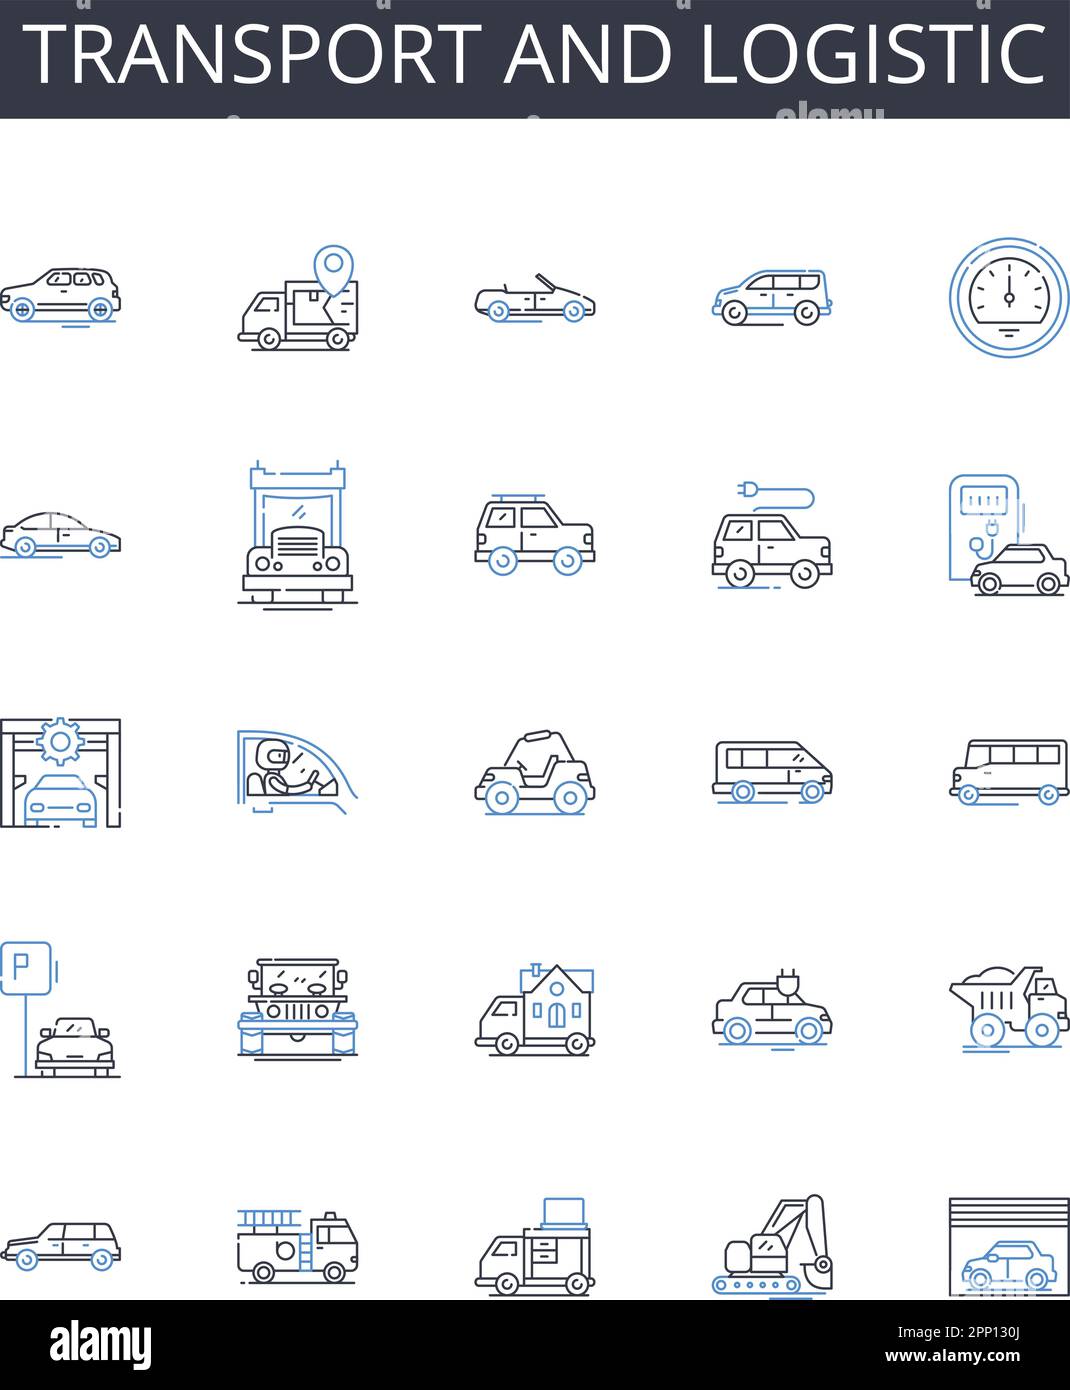 Transport and logistic line icons collection. Shipment, Cargo, Delivery, Distribution, Transit, Conveyance, Freight vector and linear illustration Stock Vector